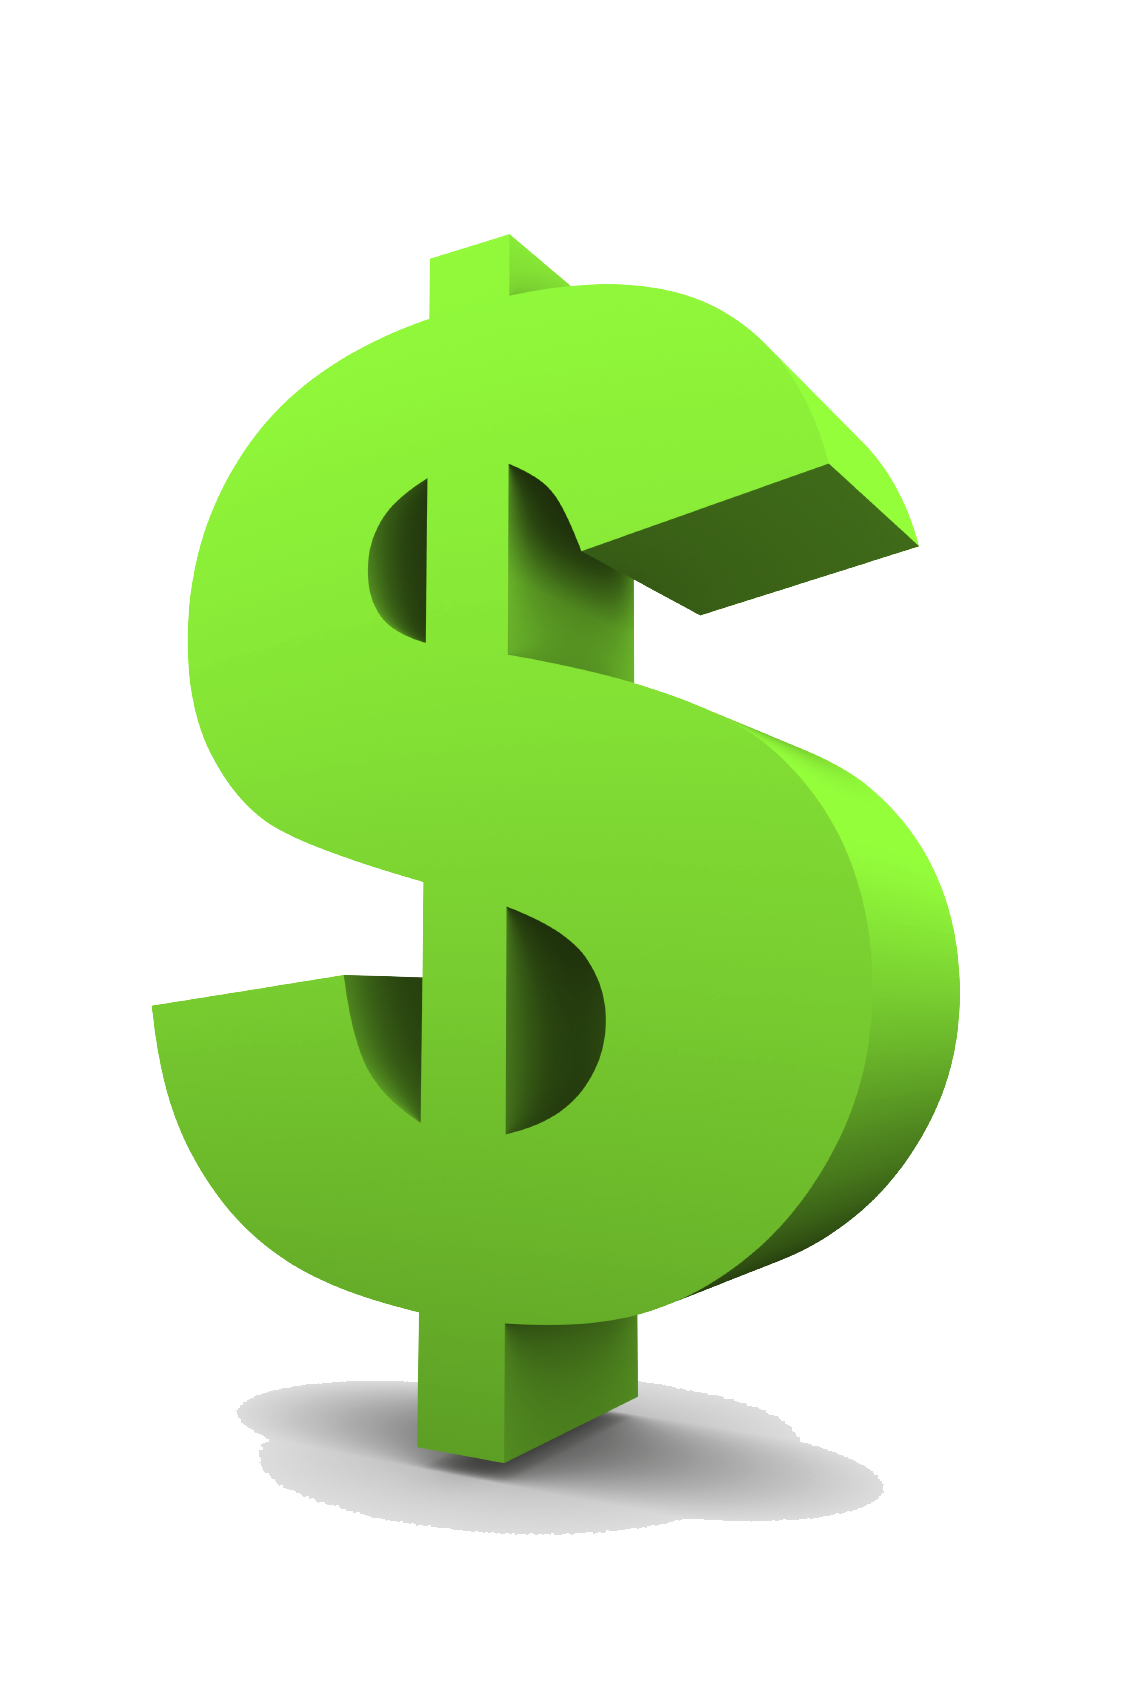 Fundraising clipart dollar bill. Png images transparent free